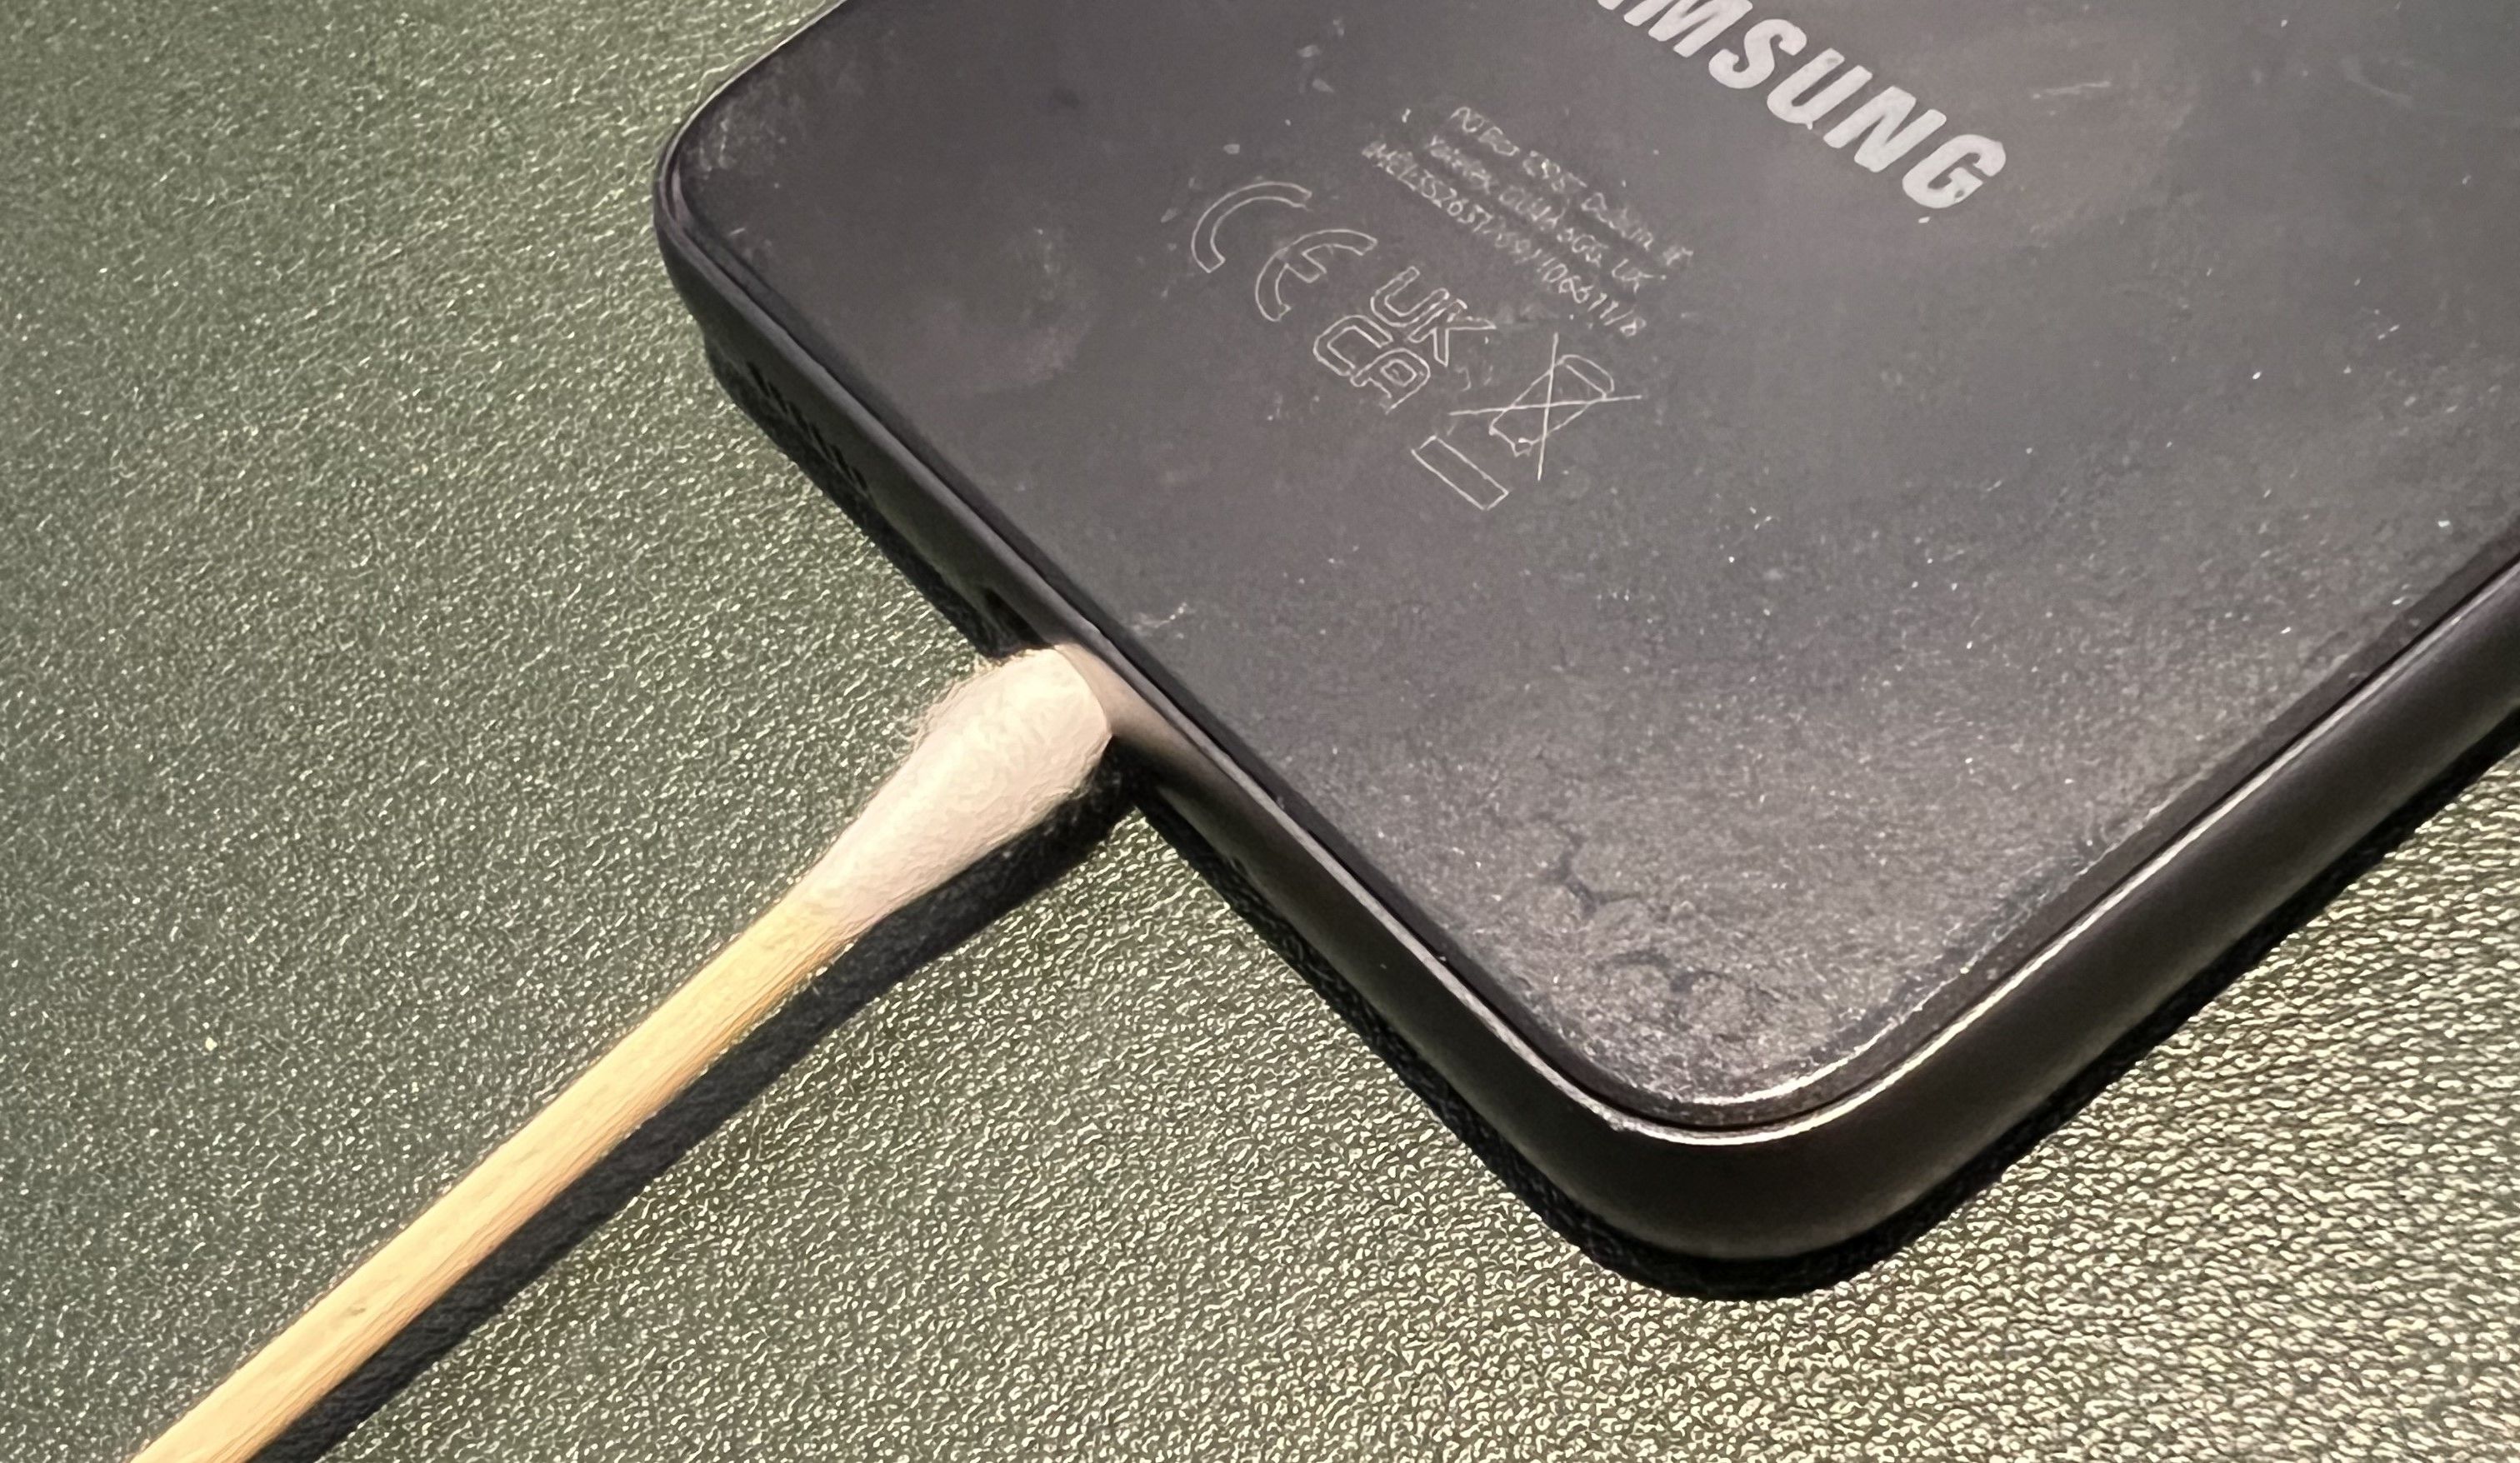 The Ultimate Guide to Cleaning Your Smartphone